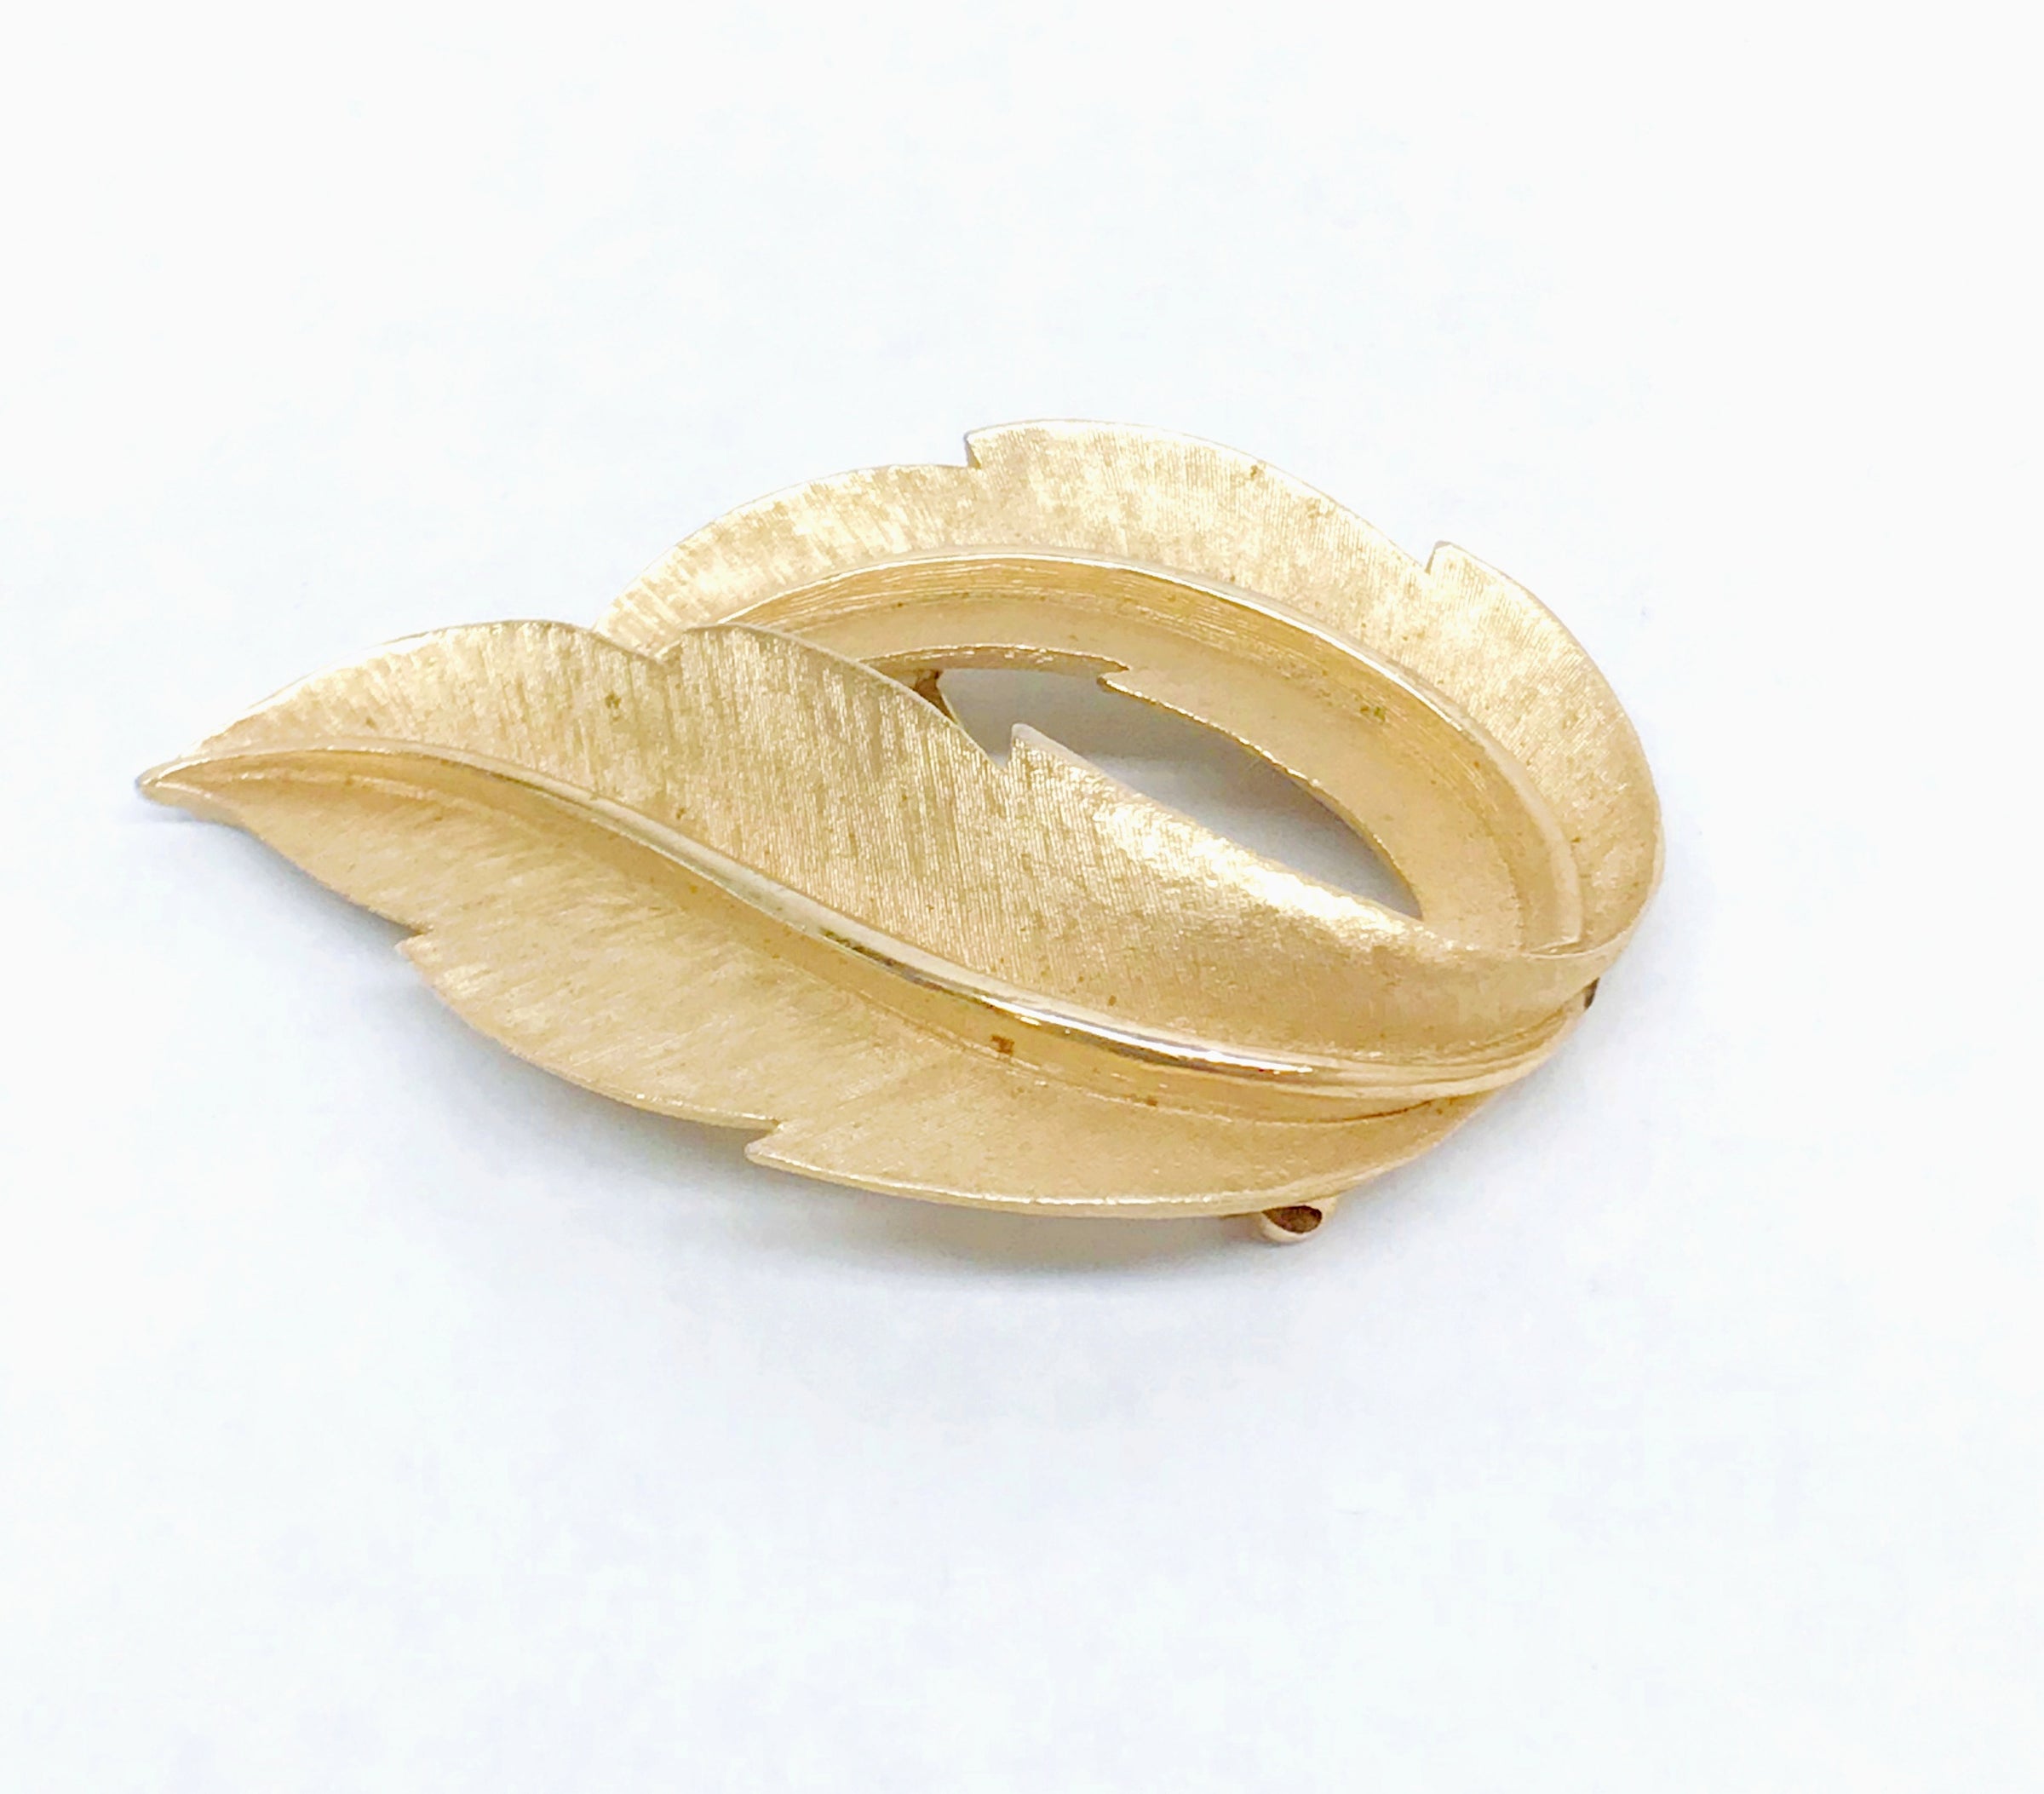 Trifari© Textured Gold Tone Leaf Brooch Pin - Hers and His Treasures